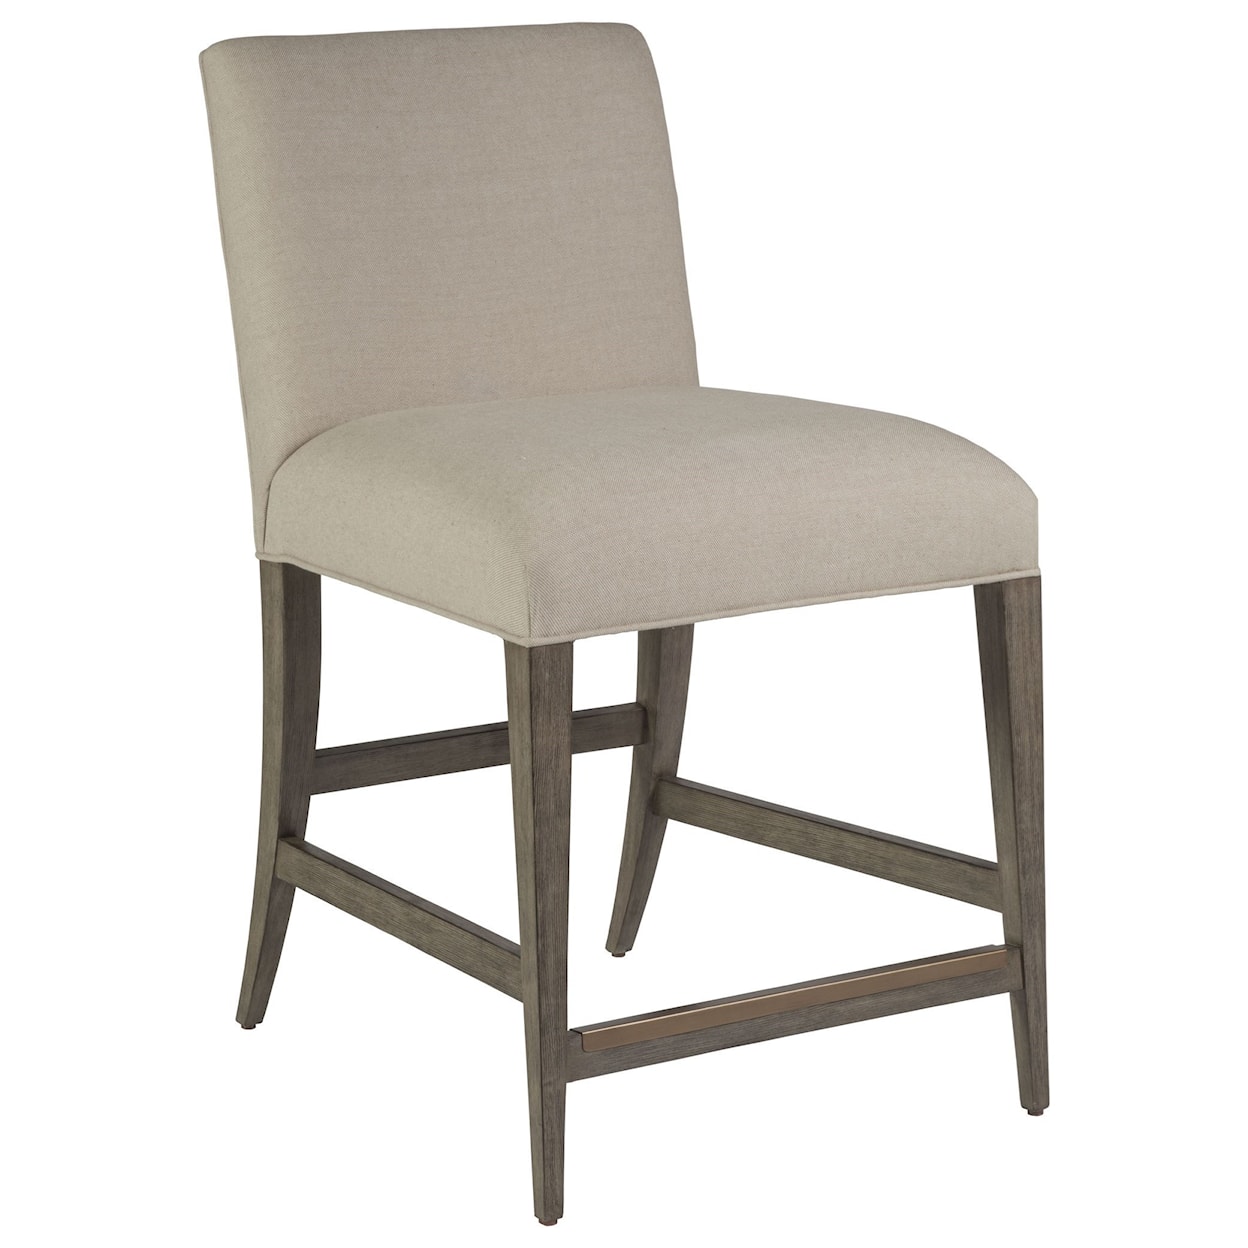 Artistica Cohesion Madox Upholstered Low Back Counter Stool